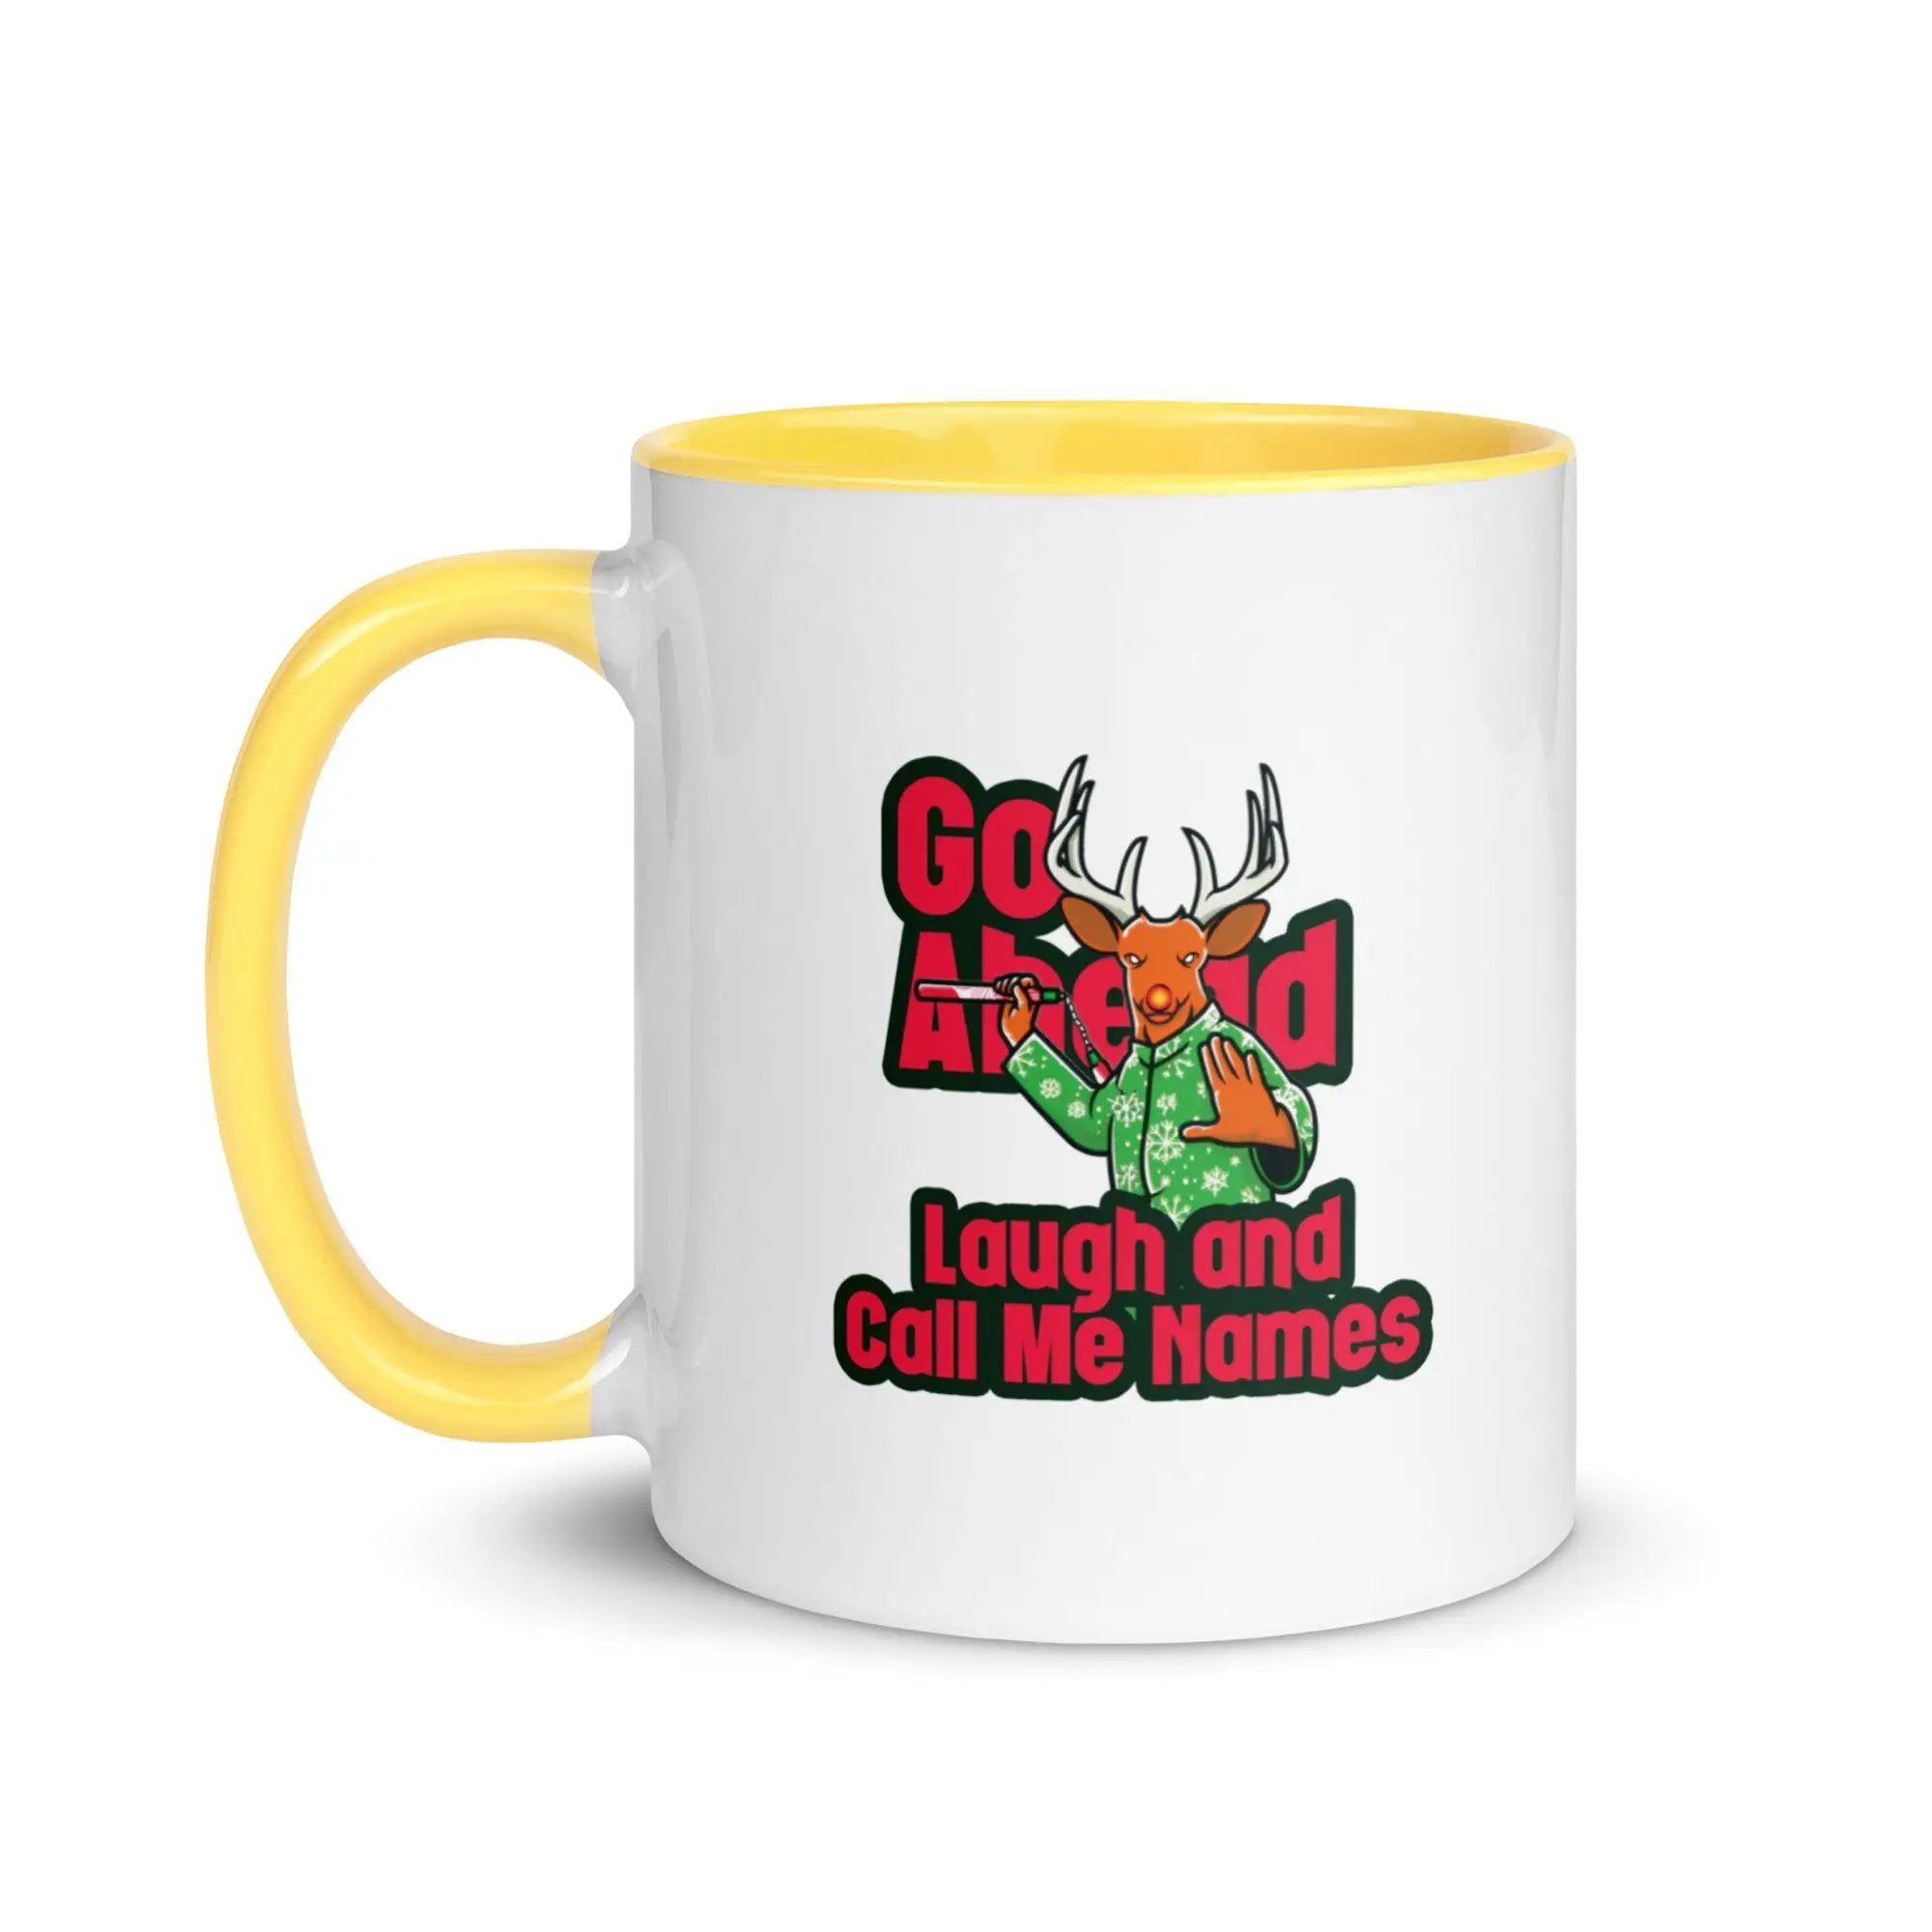 a red and white coffee mug with the words go ahead laugh and call me names